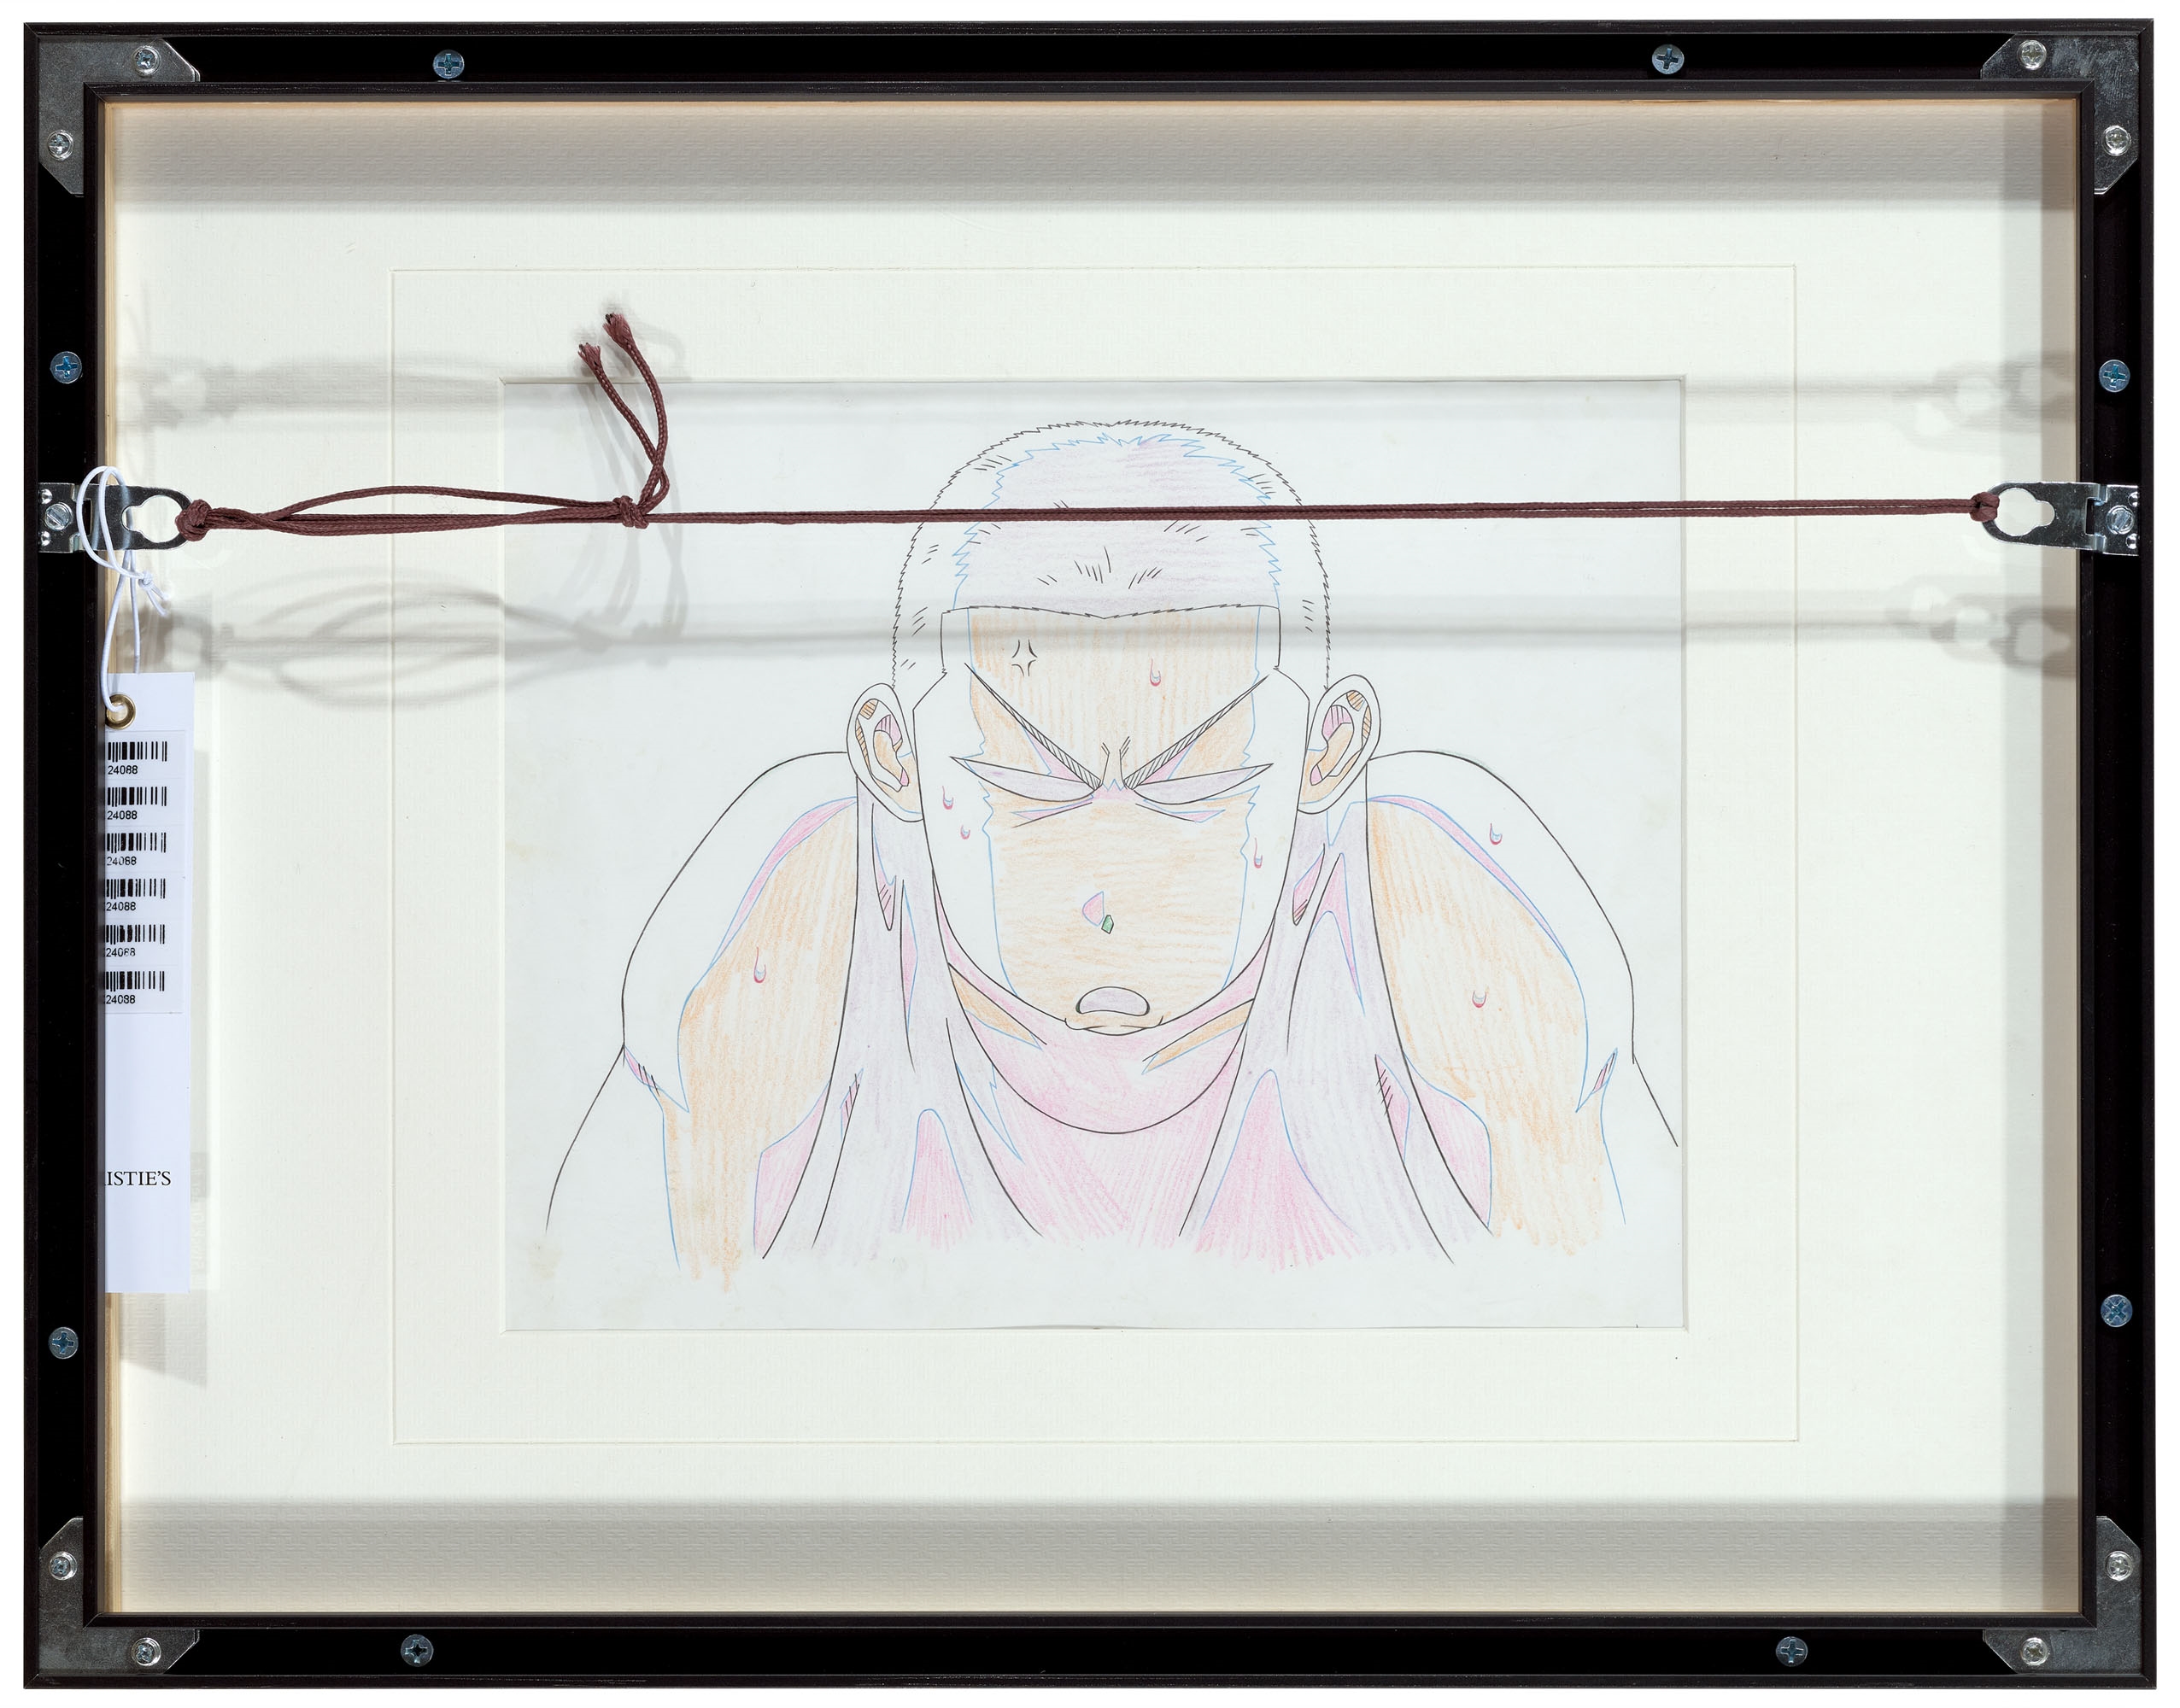 Artwork by Toei Animation, Two works: Hanamichi Sakuragi, Made of acrylic and marker on cel; & gouache on paper; pencil and colour pencil on paper